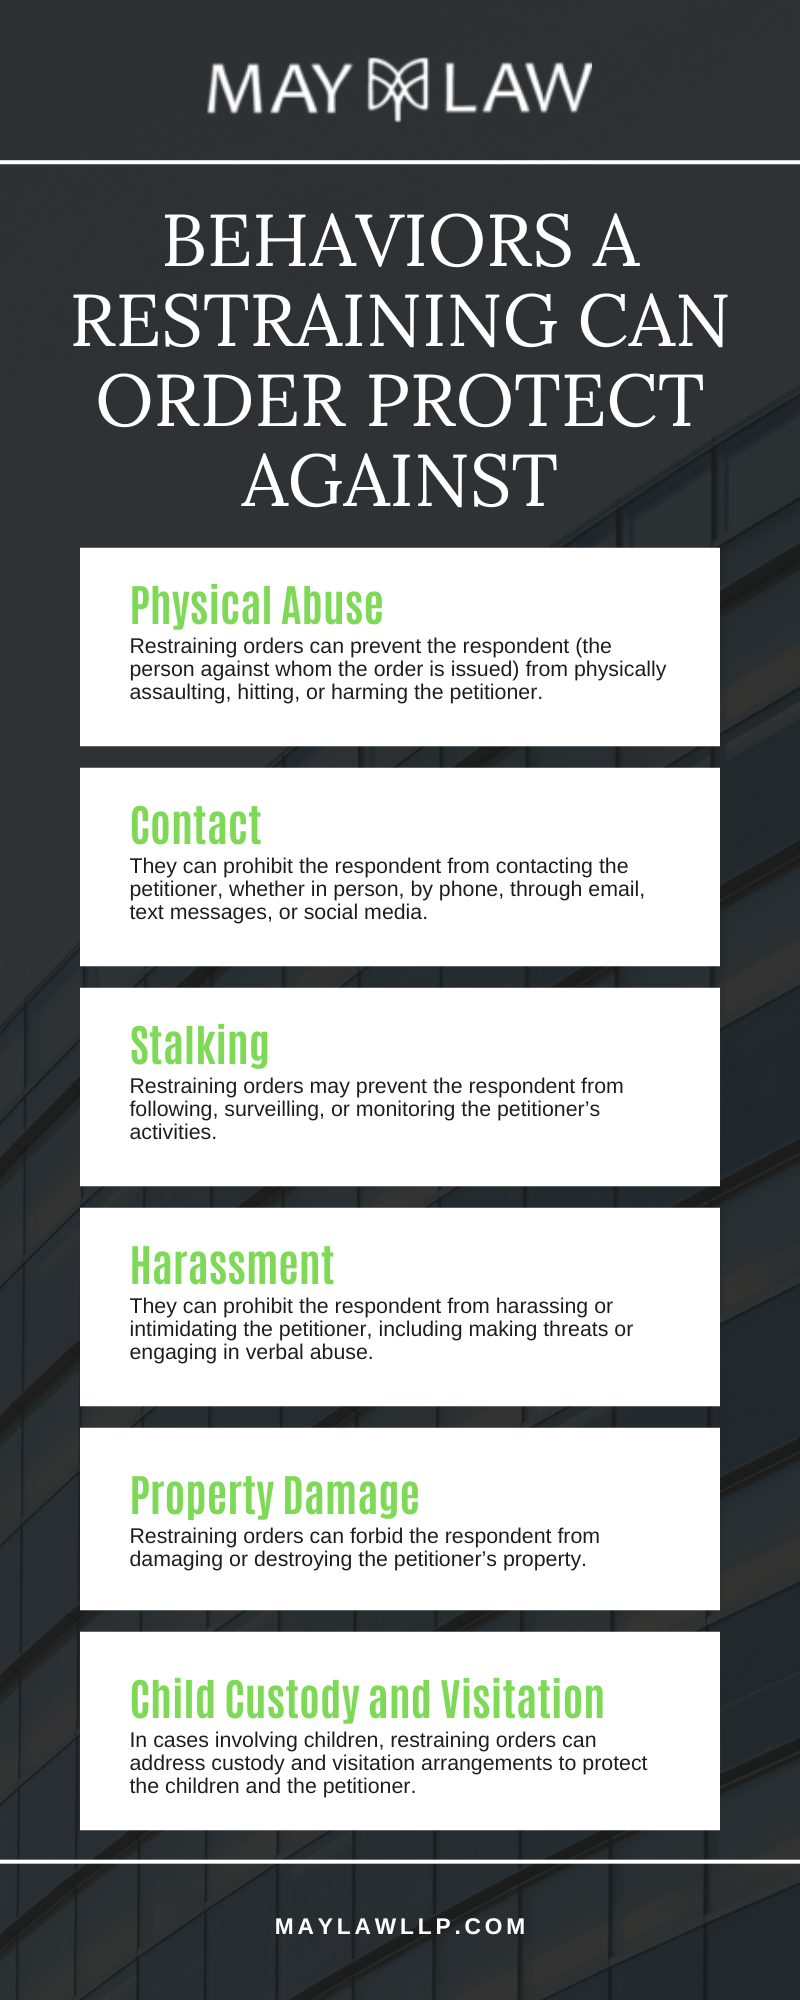 Behaviors A Restraining Order Can Protect Against Infographic